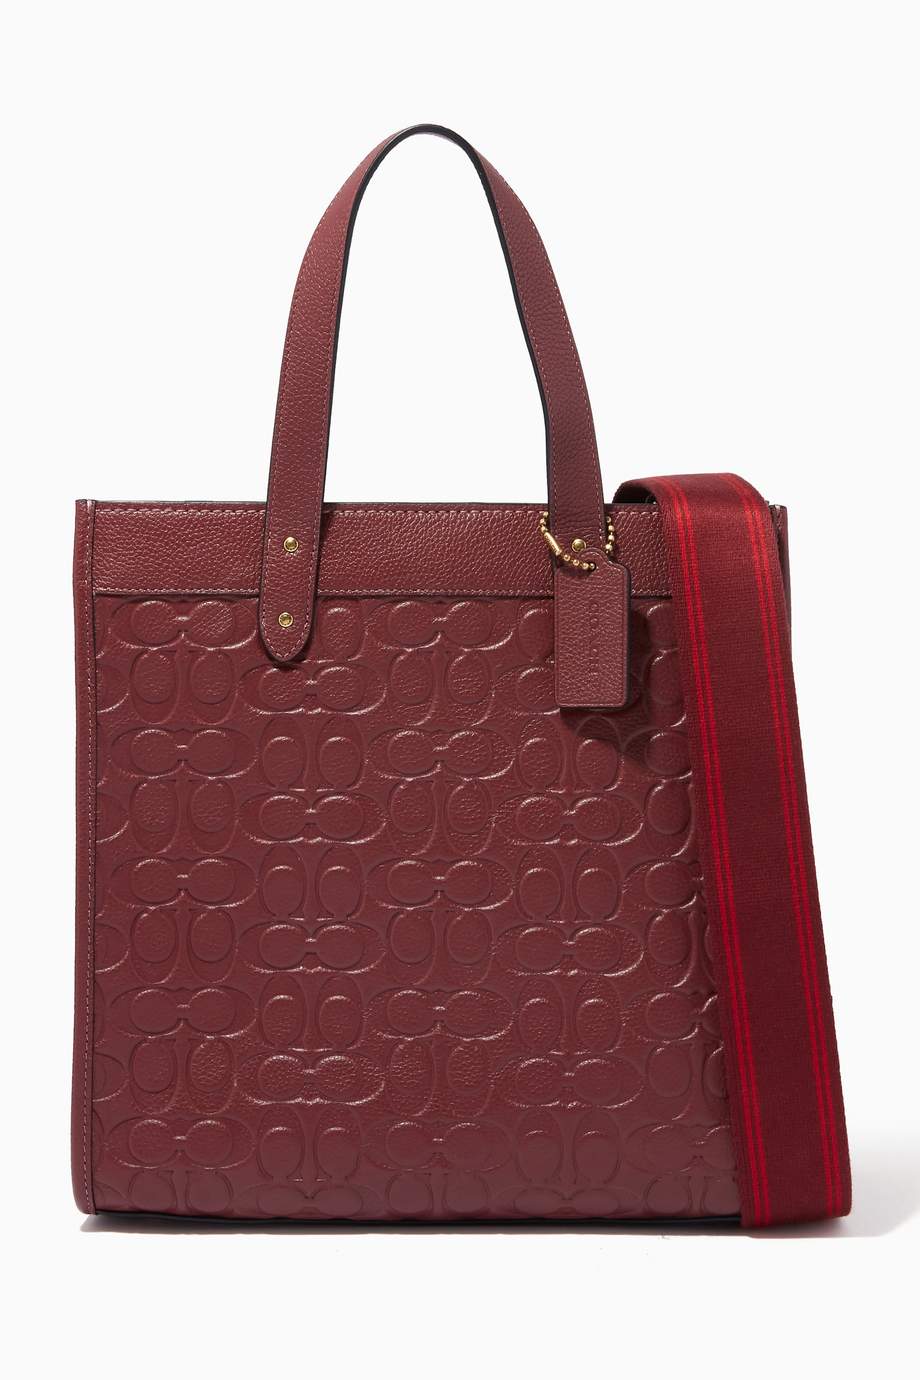 Shop Coach Red Field Tote Bag in Signature Embossed Leather for Women | Ounass UAE